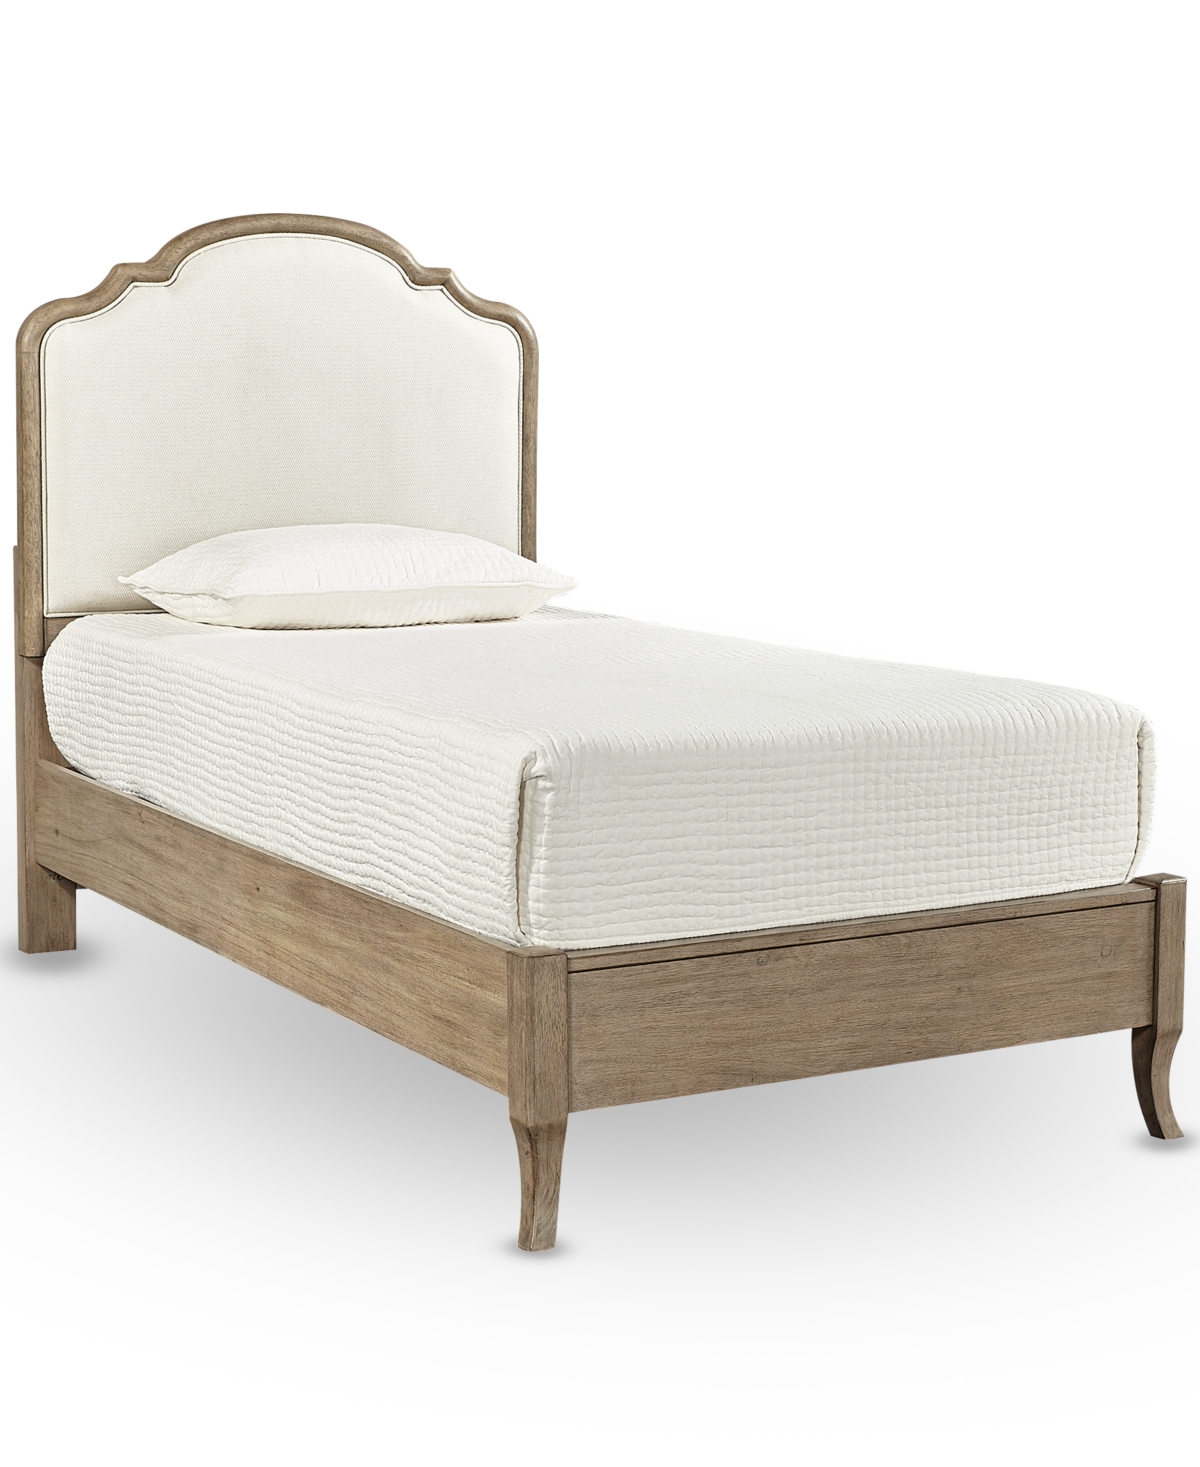 Furniture Provence Upholstered Twin Bed